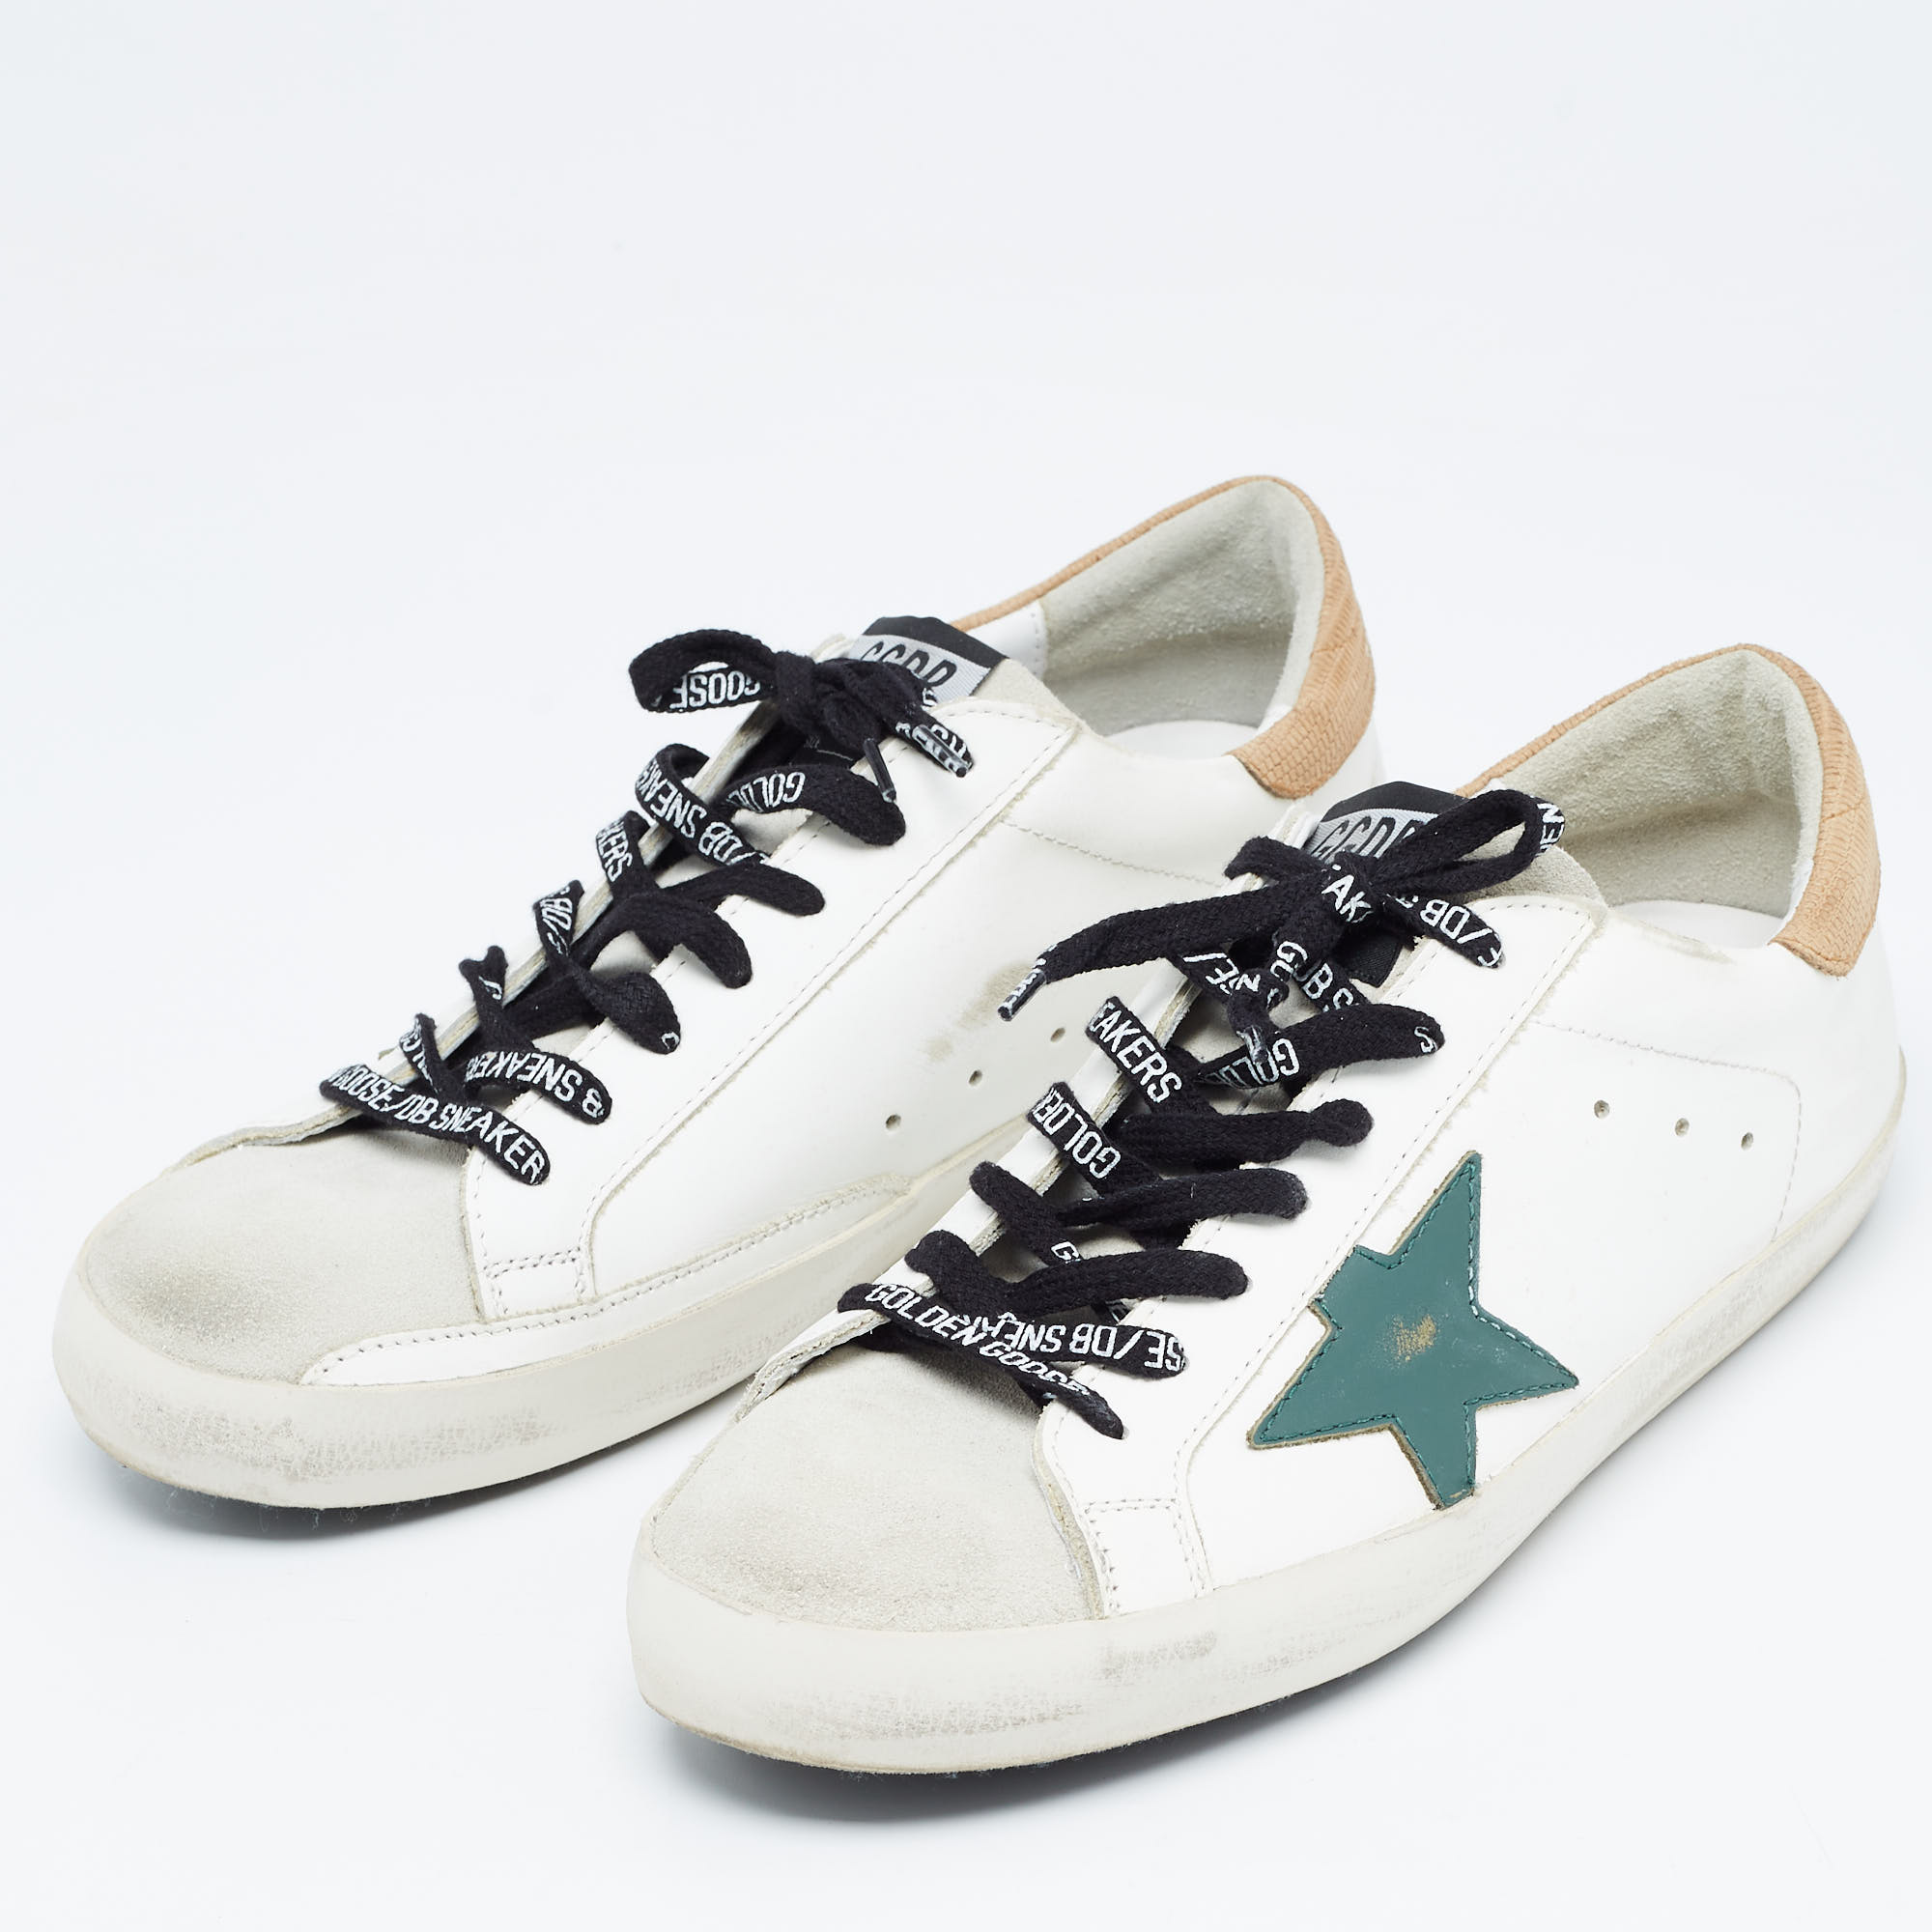 

Golden Goose White/Grey Leather and Suede Superstar Sneakers Size